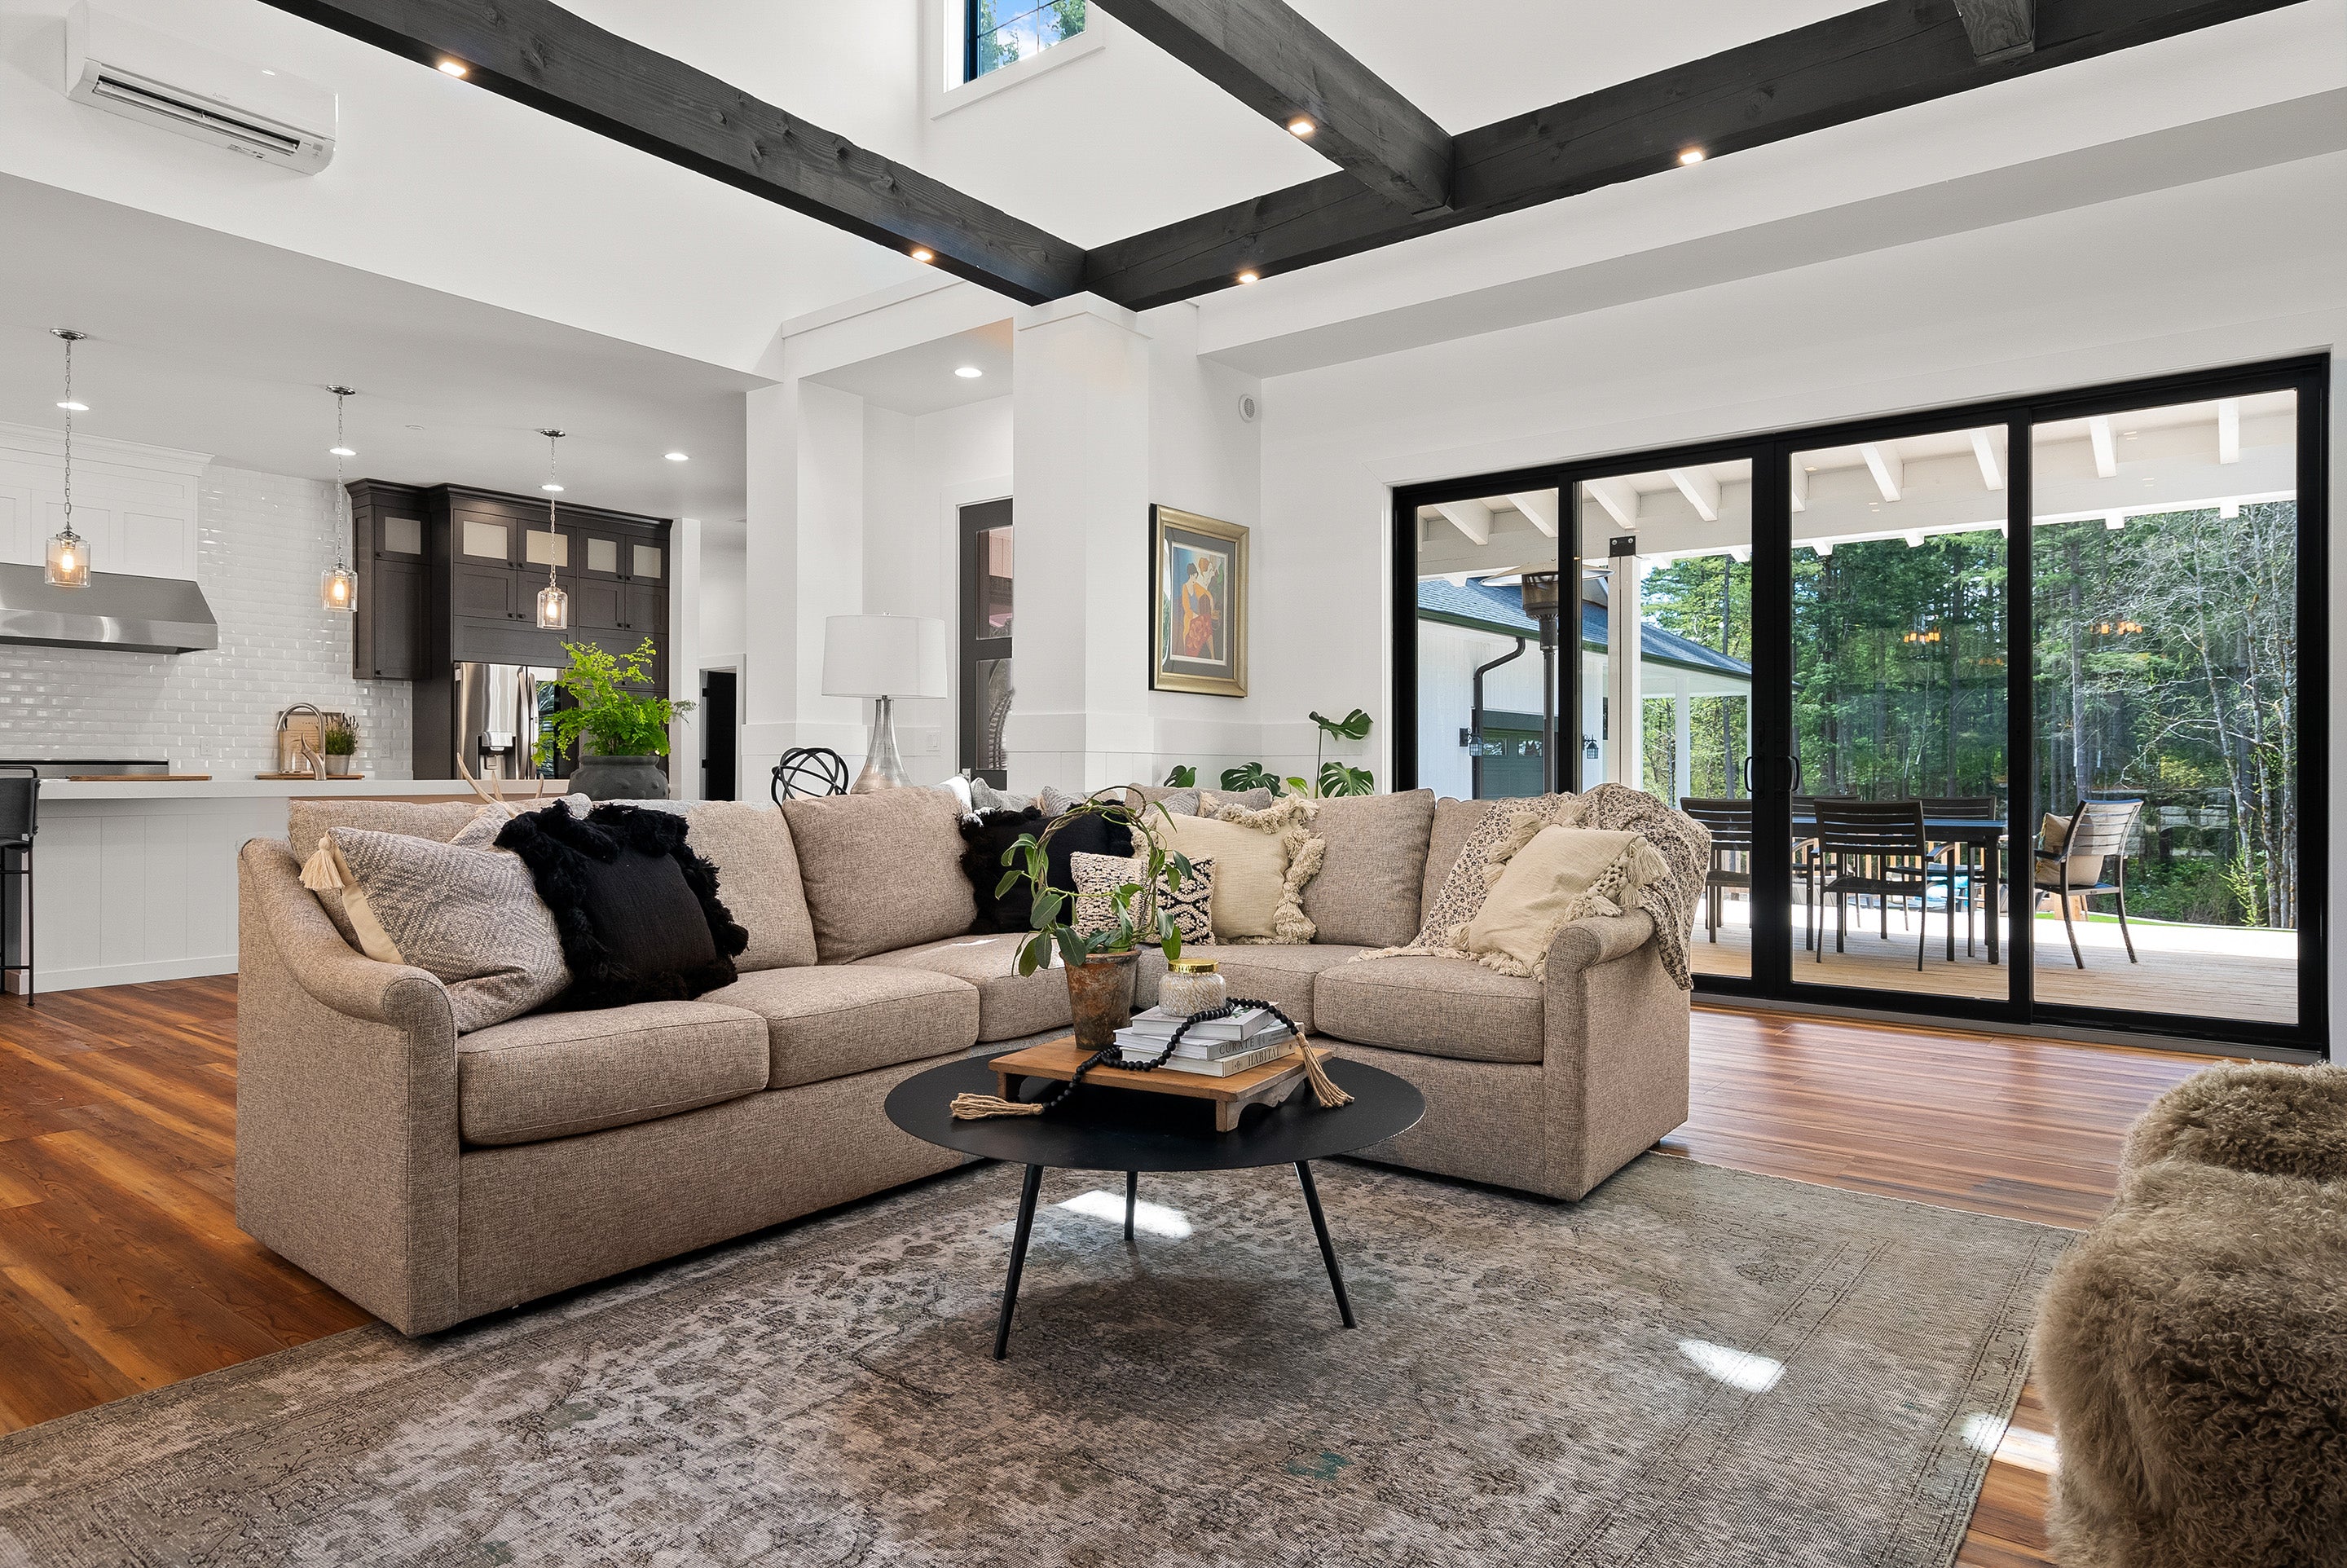 A light brown sectional sofa sits in a large open living room with beige throw pillows. There is a round black coffee table in front of the sofa.